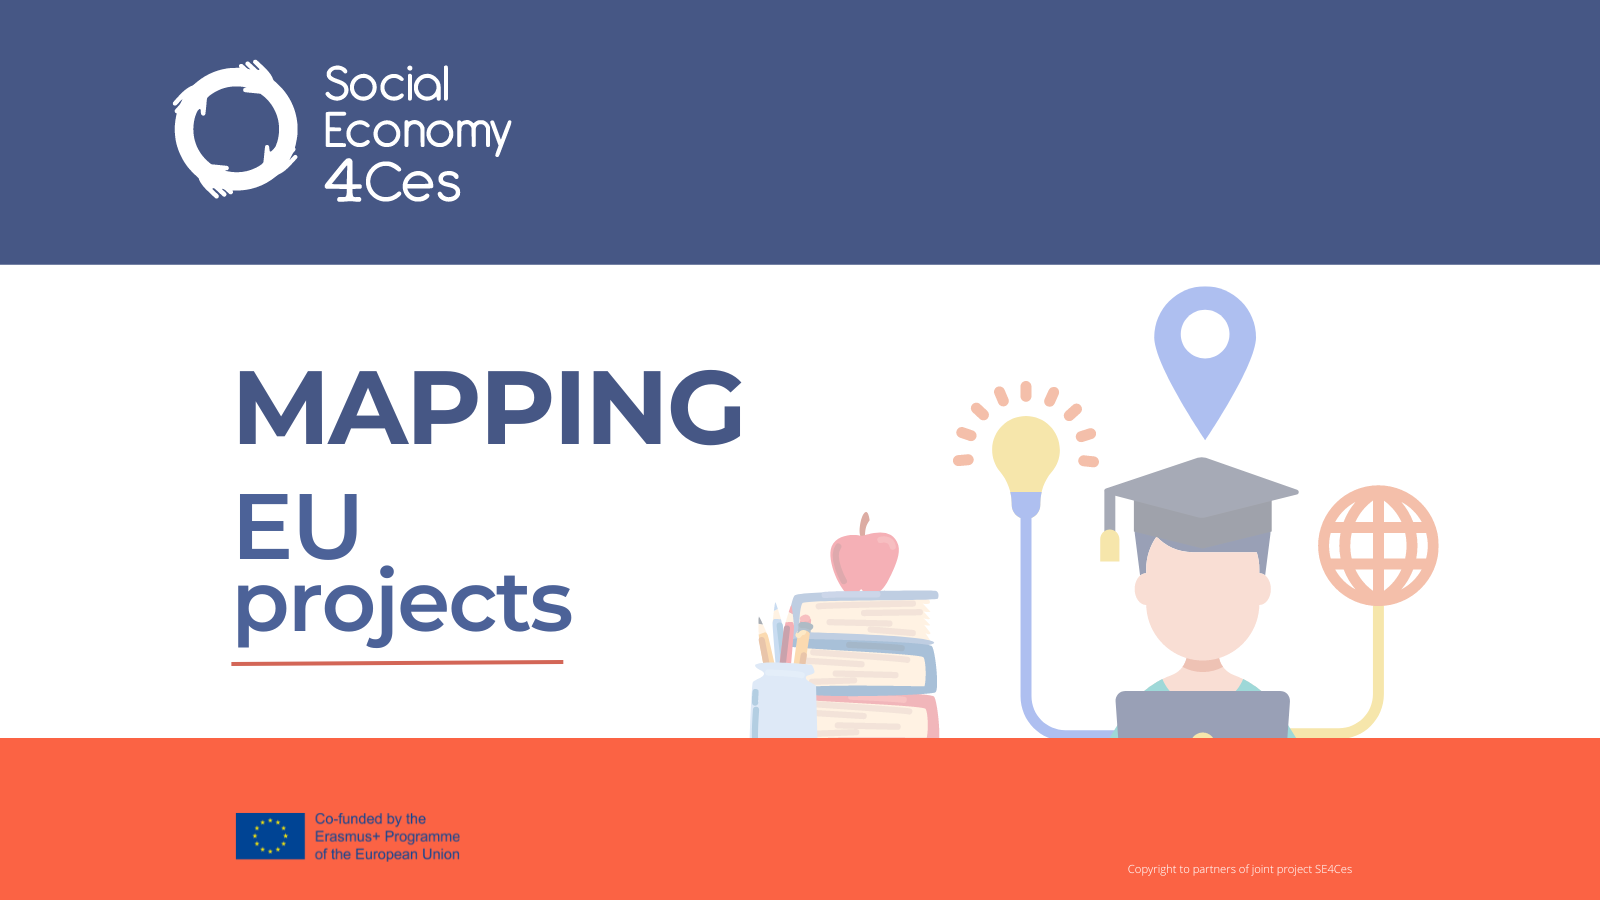 Report: mapping of; SE actors, HEIs through EU partnerships, and Service Learning activities.